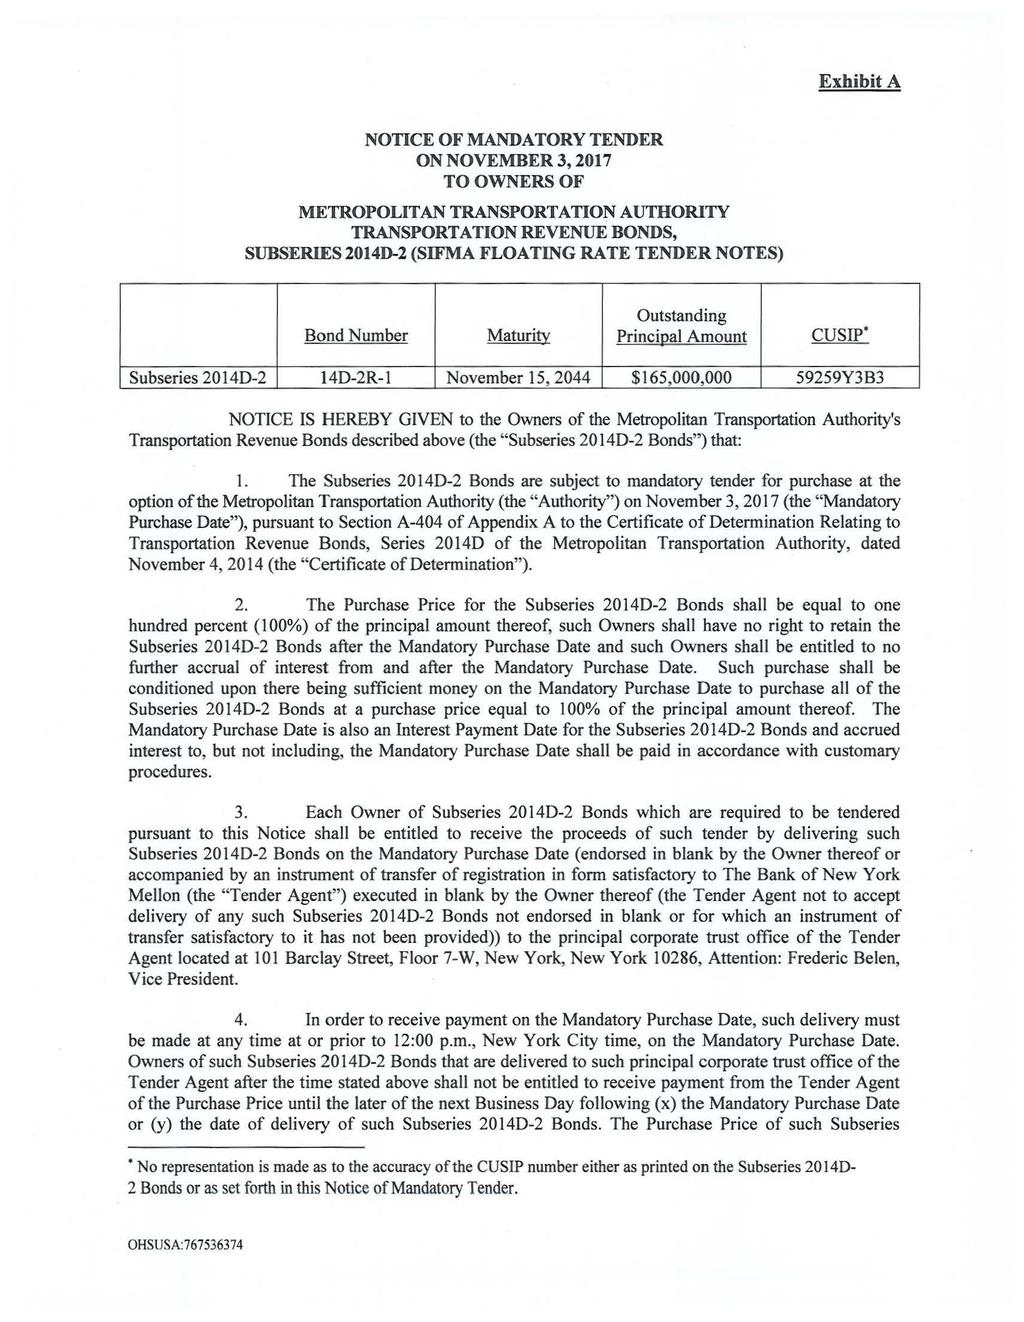 Exhibit A NOTICE OF MANDATORY TENDER ON NOVEMBER 3, 2017 TO OWNERS OF METRO PO LIT AN TRANSPORTATION AUTHORITY TRANSPORTATION REVENUE BONDS, SUBSERIES 2014D-2 (SIFMA FLOATING RATE TENDER NOTES)